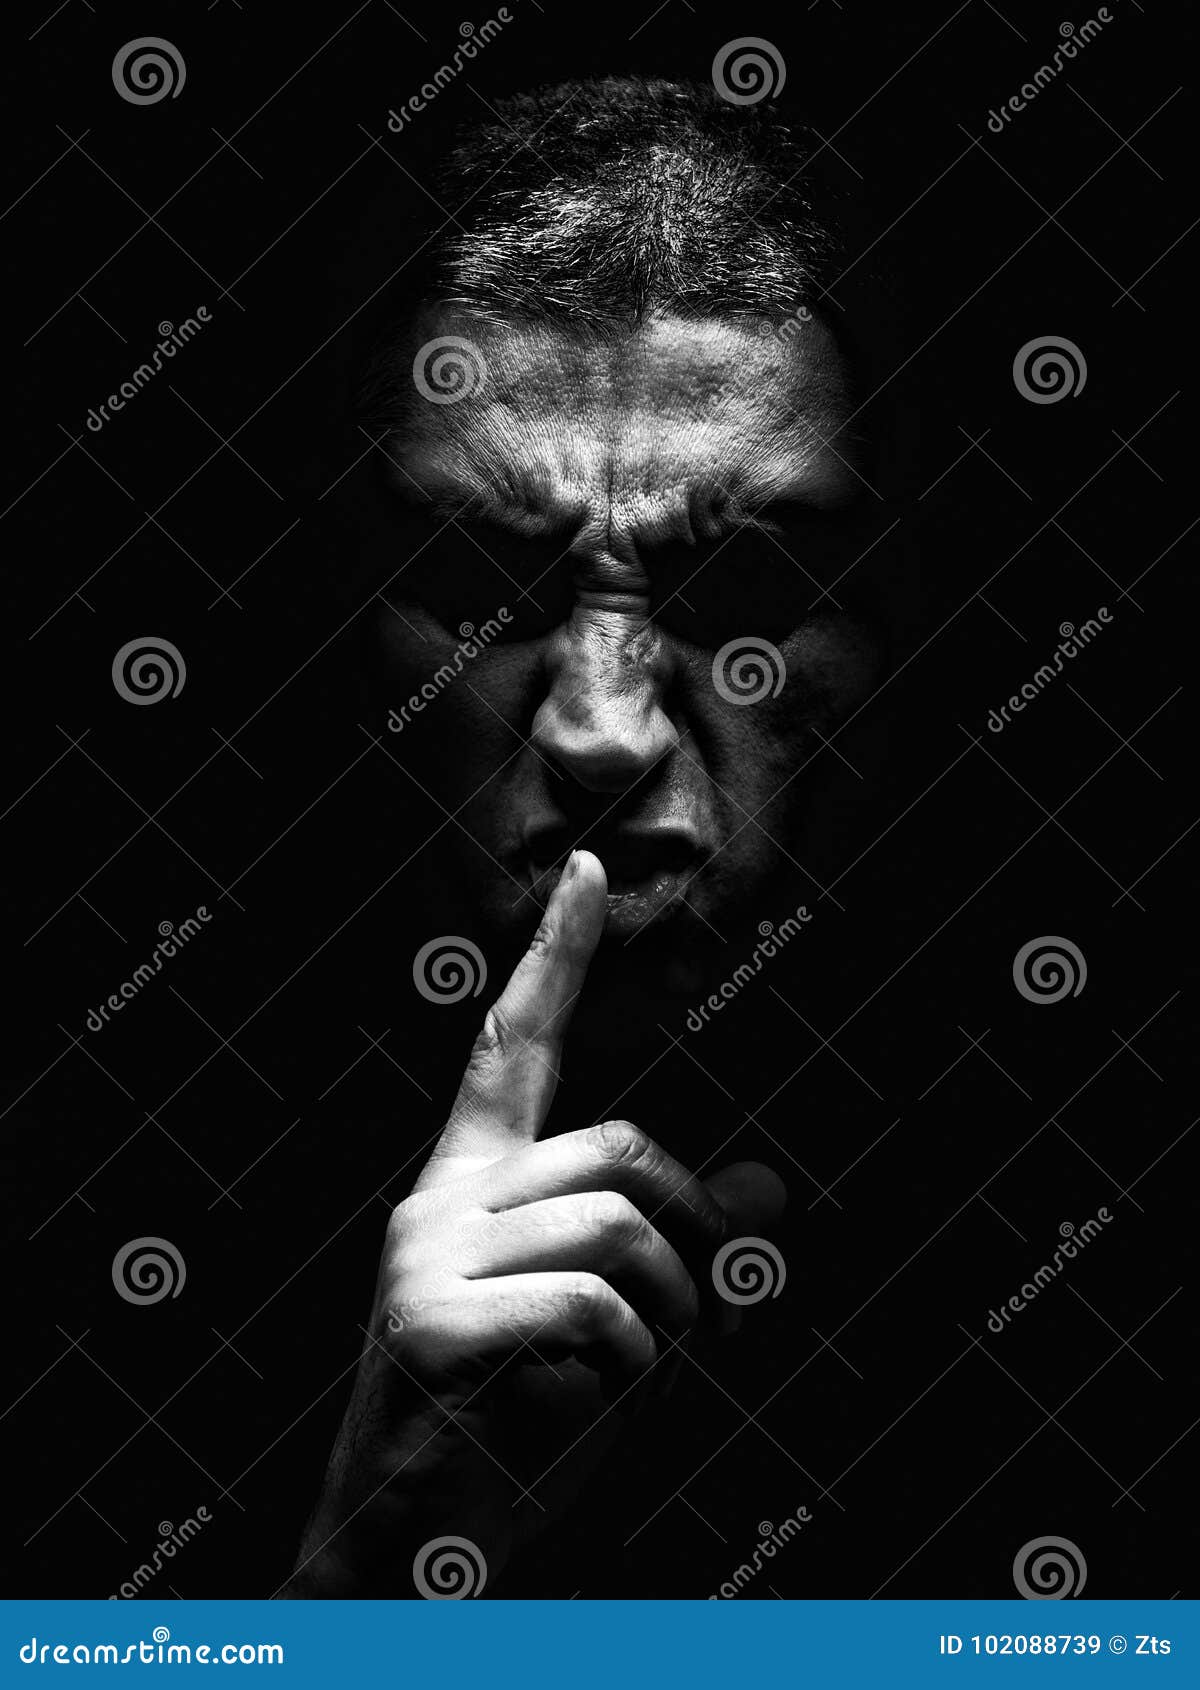 furious mature man with an aggressive look making the silence sign in a violent and threatening way.